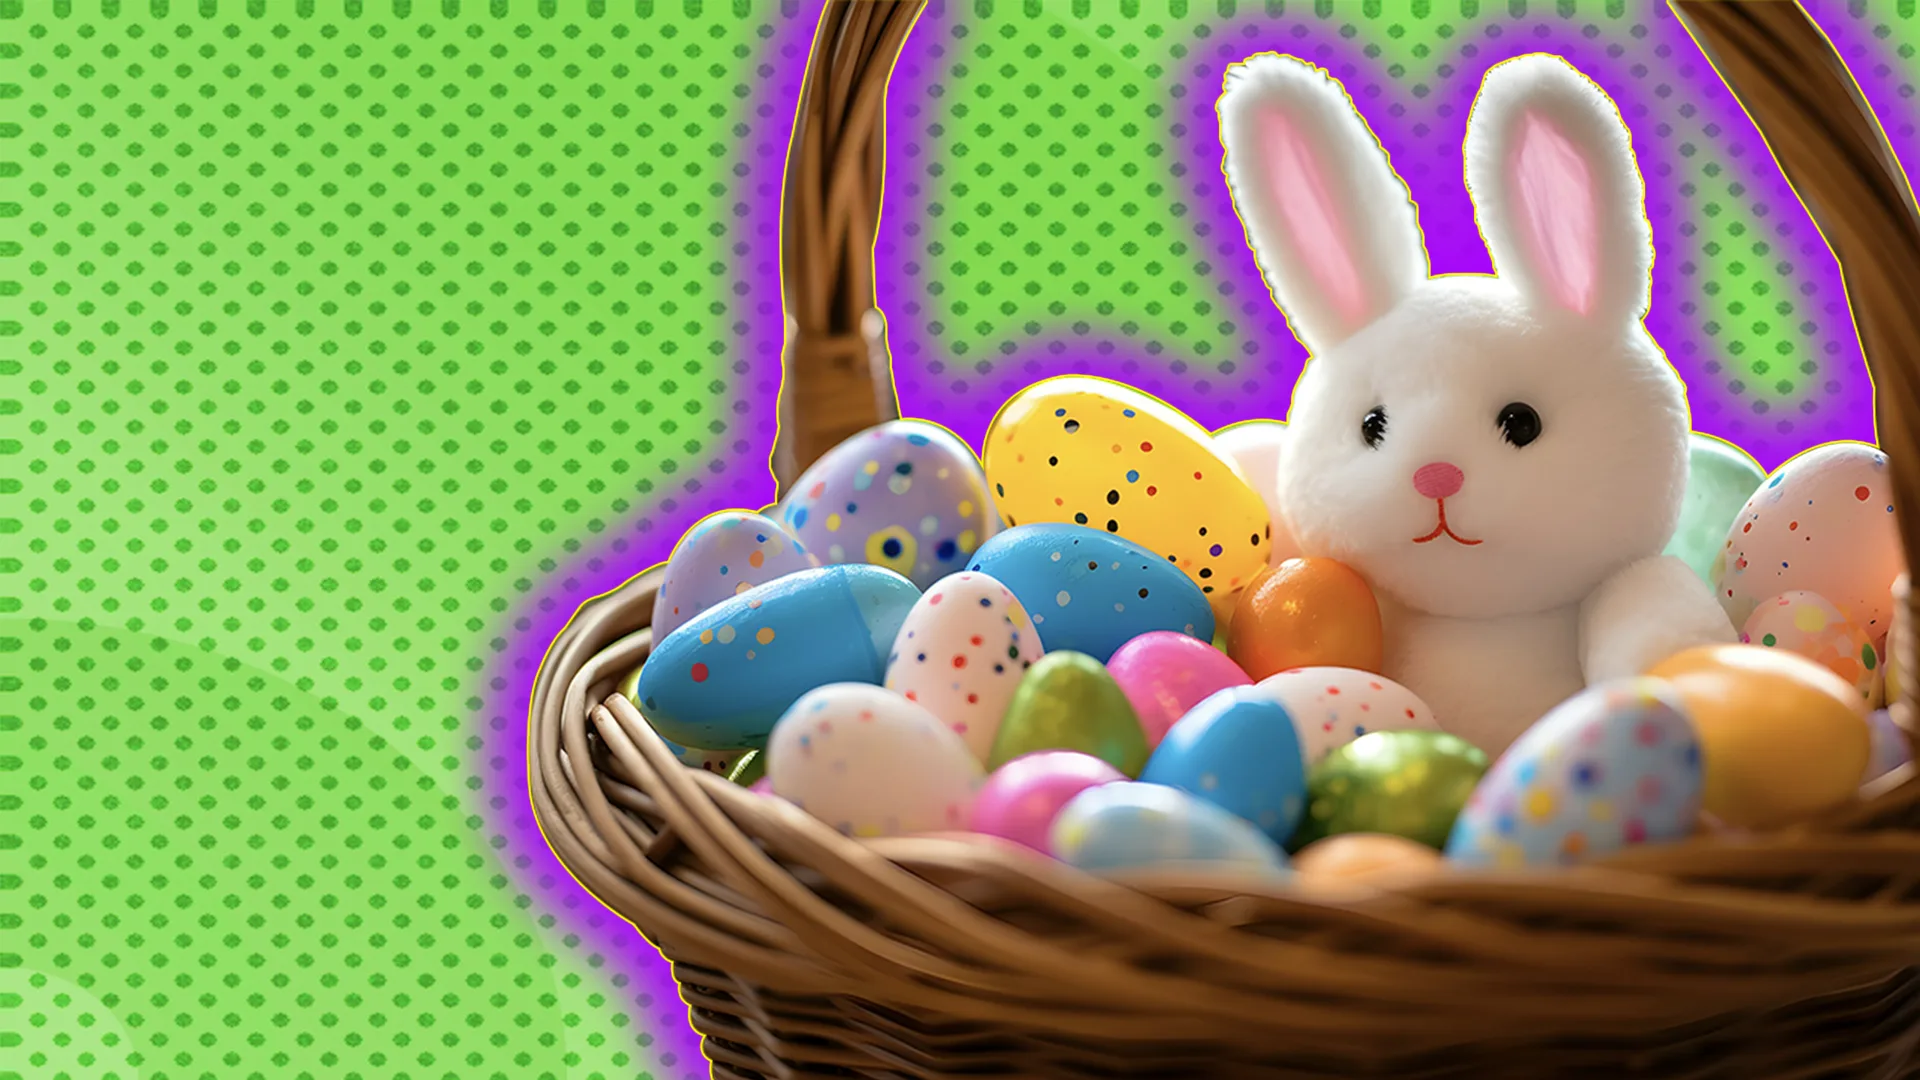 Easter egg basket with bunny toy and eggs green spotted background